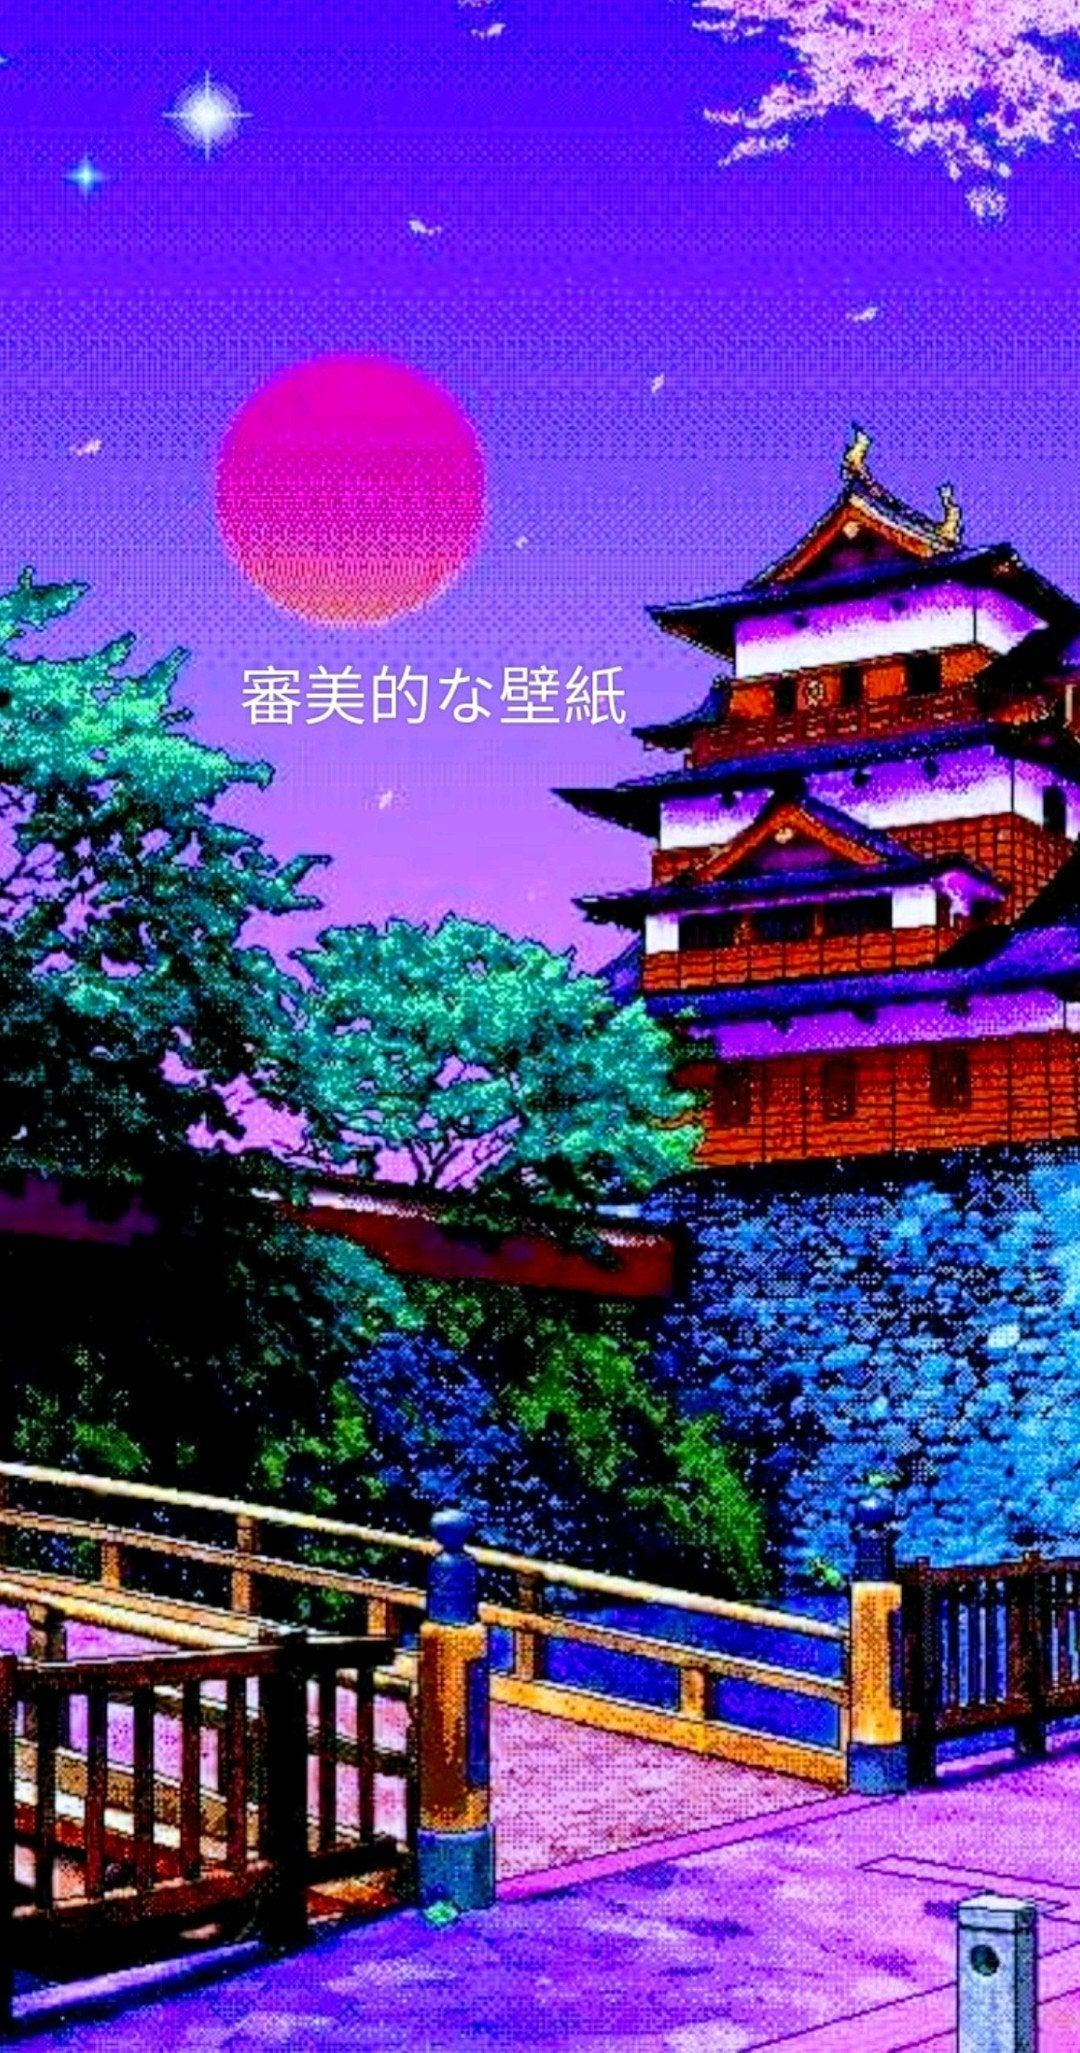 Aesthetic Anime Purple Ps4 Wallpapers - Wallpaper Cave